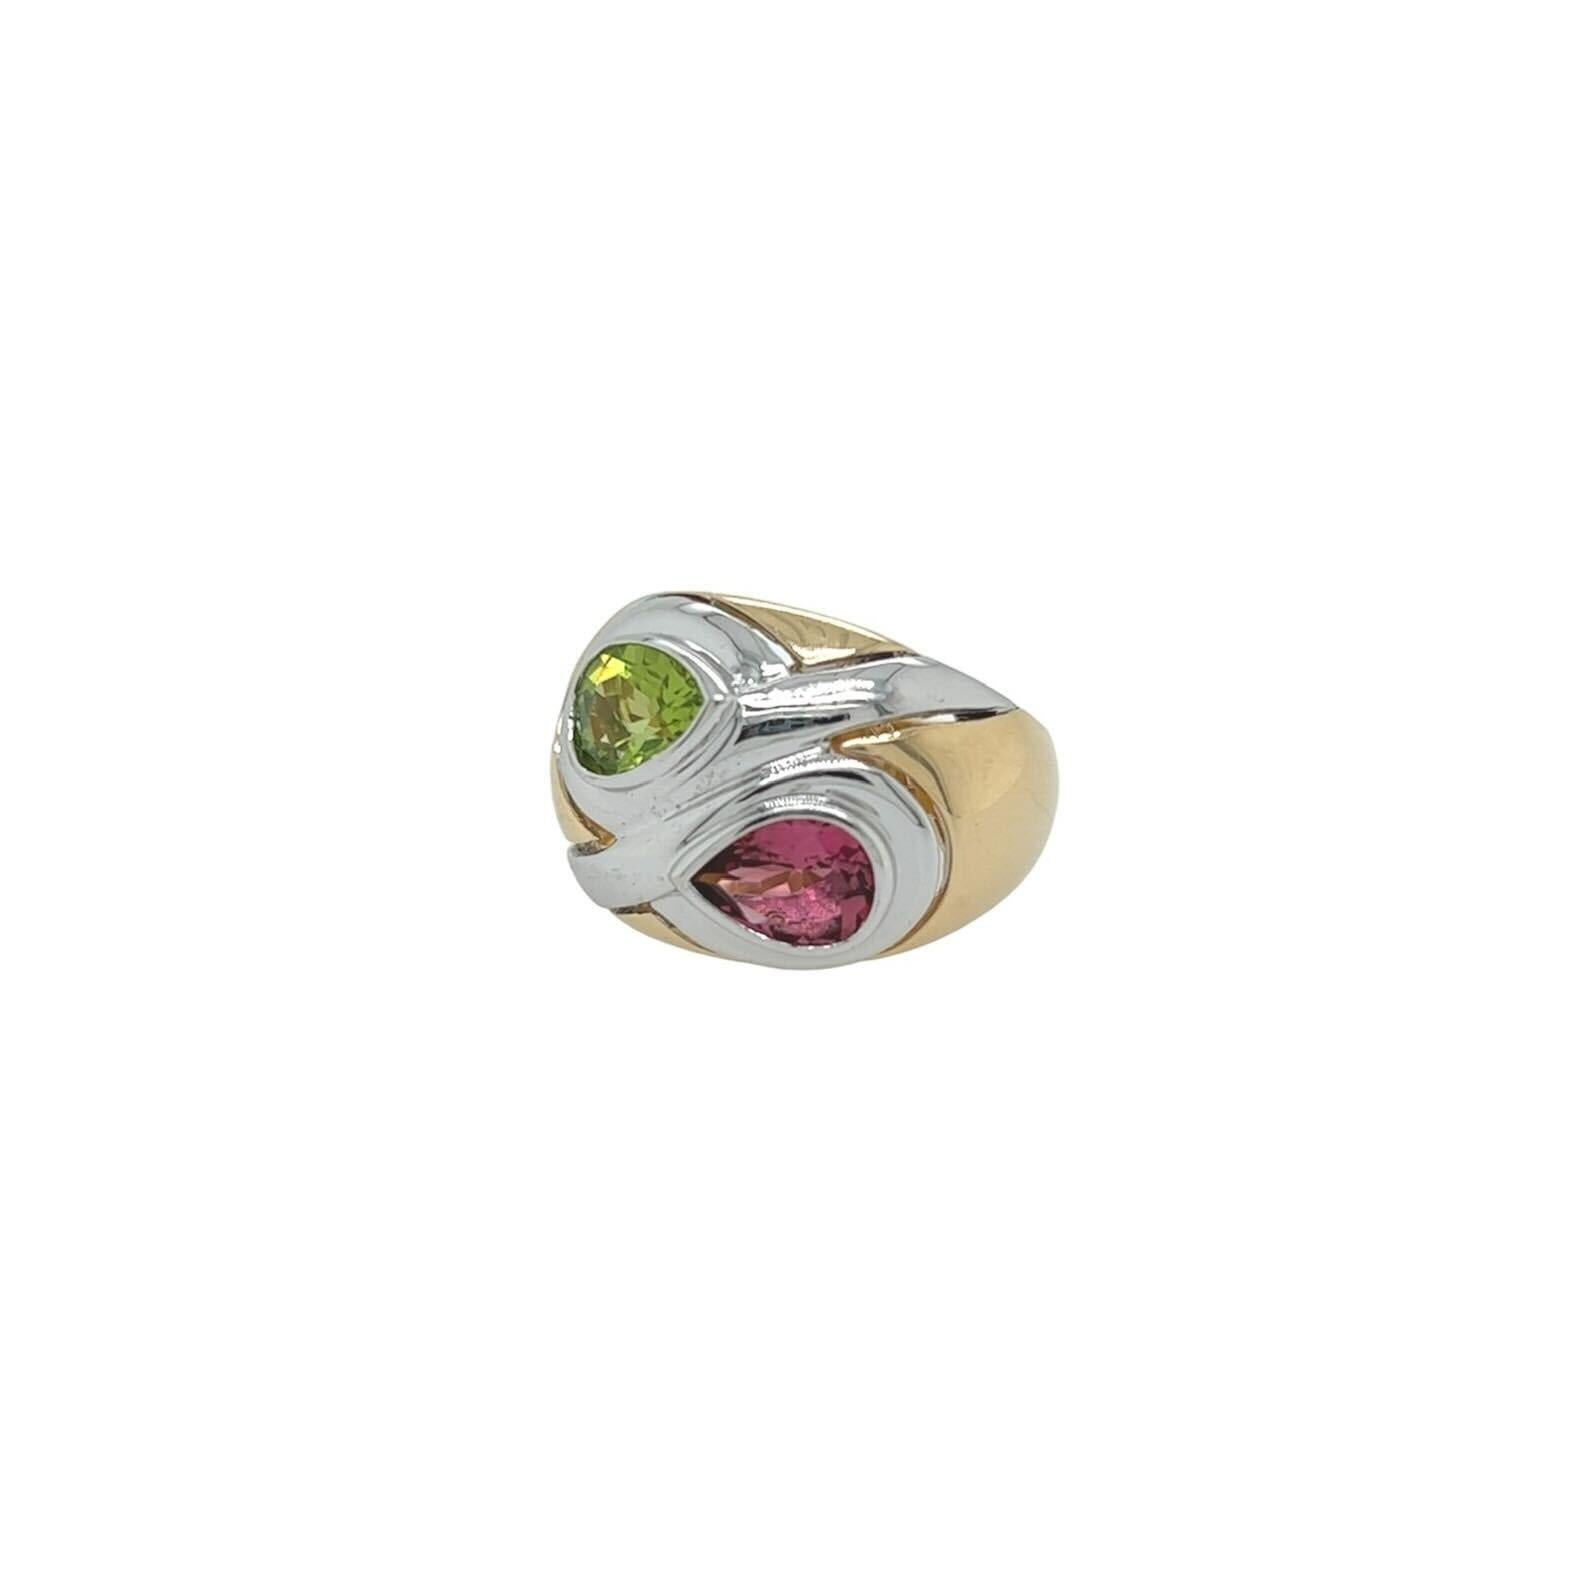 A 14 karat yellow and white gold, peridot and pink tourmaline ring.  The ring centering a bezel set pear shaped peridot measuring approximately 7.73 x 5.69 mm and a bezel set pear shaped pink tourmaline measuring approximately 7.26 x 5.54 mm